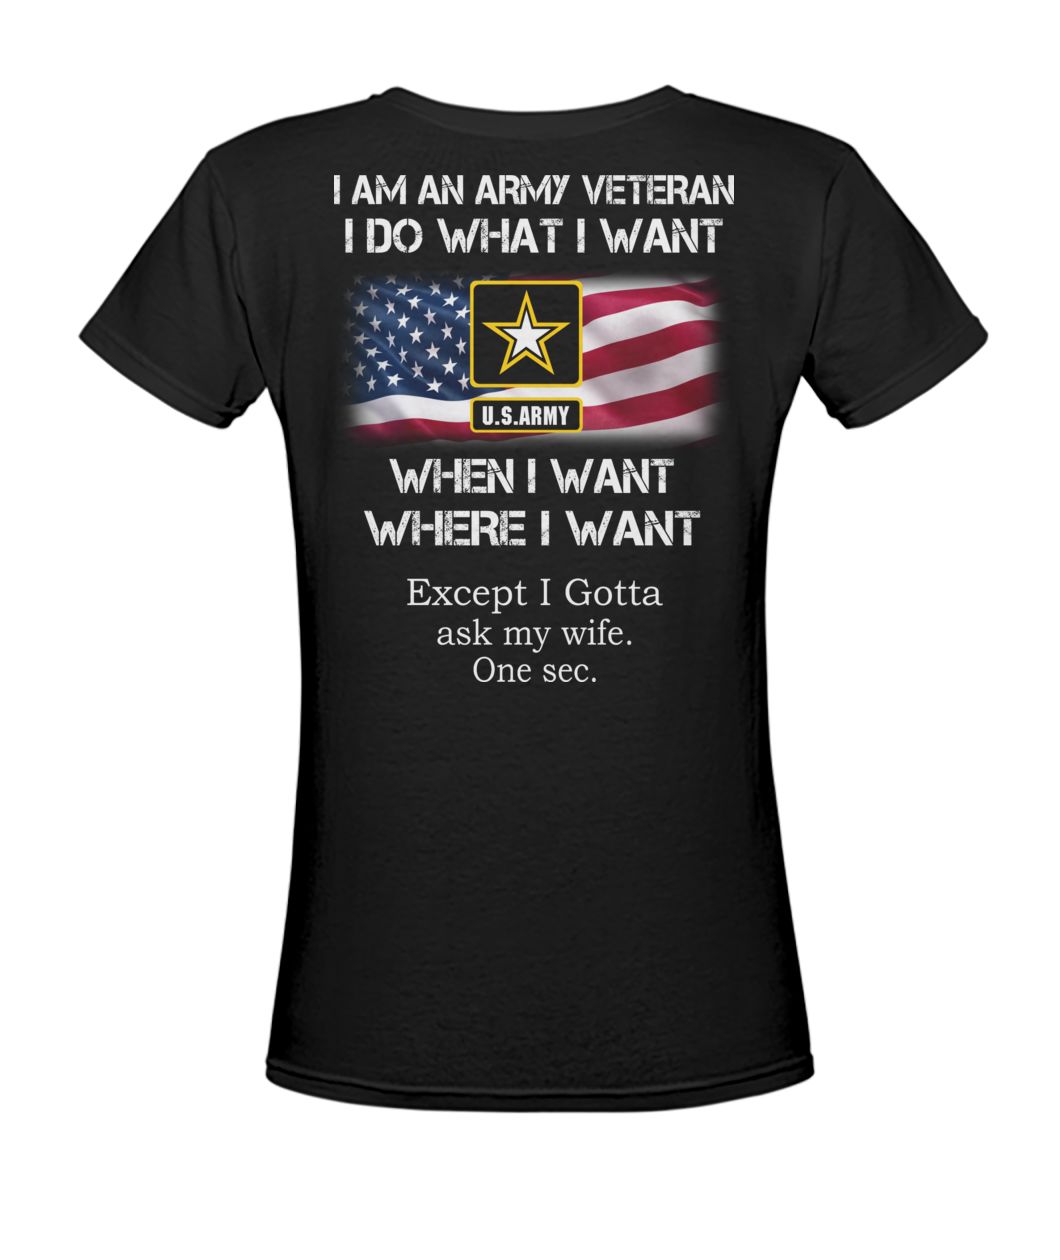 I am an army veteran I do what I want when I want where I want except I gotta ask my wife women's v-neck